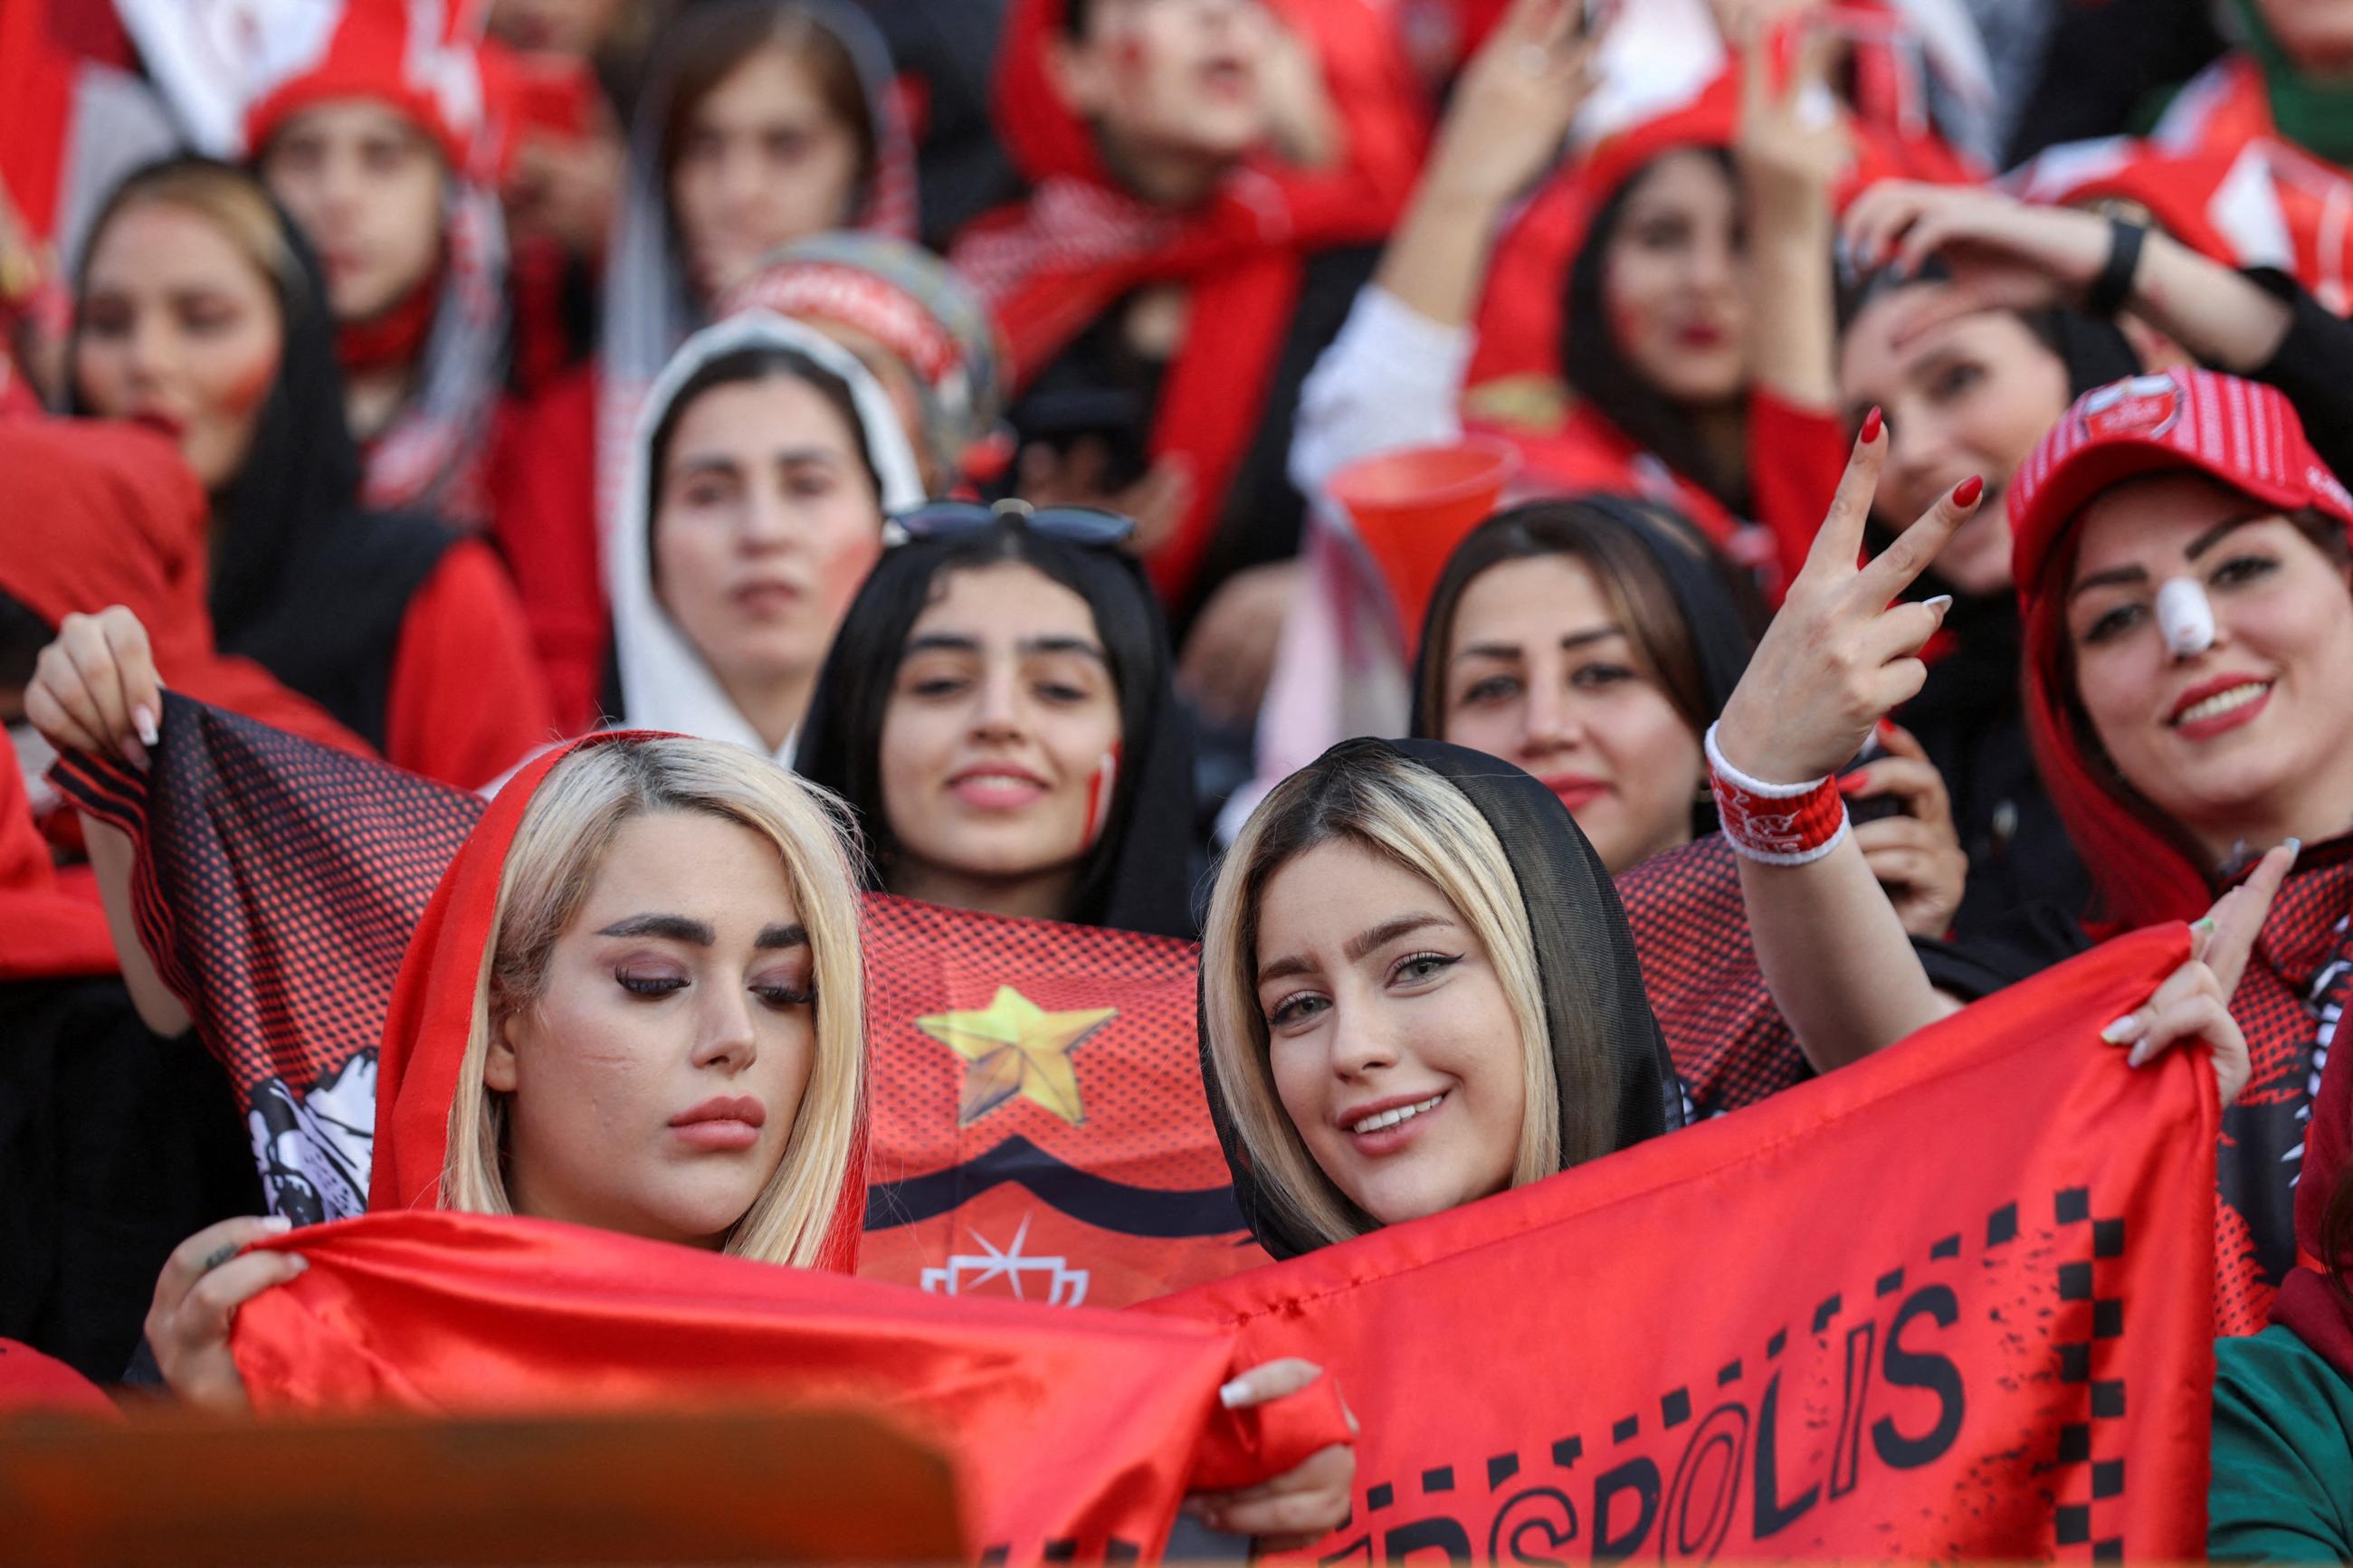 Women soccer fans, many dressed in red, attend a match for Iran's Premier League at Azadi Stadium in Tehran, Iran, on August 31, 2022.